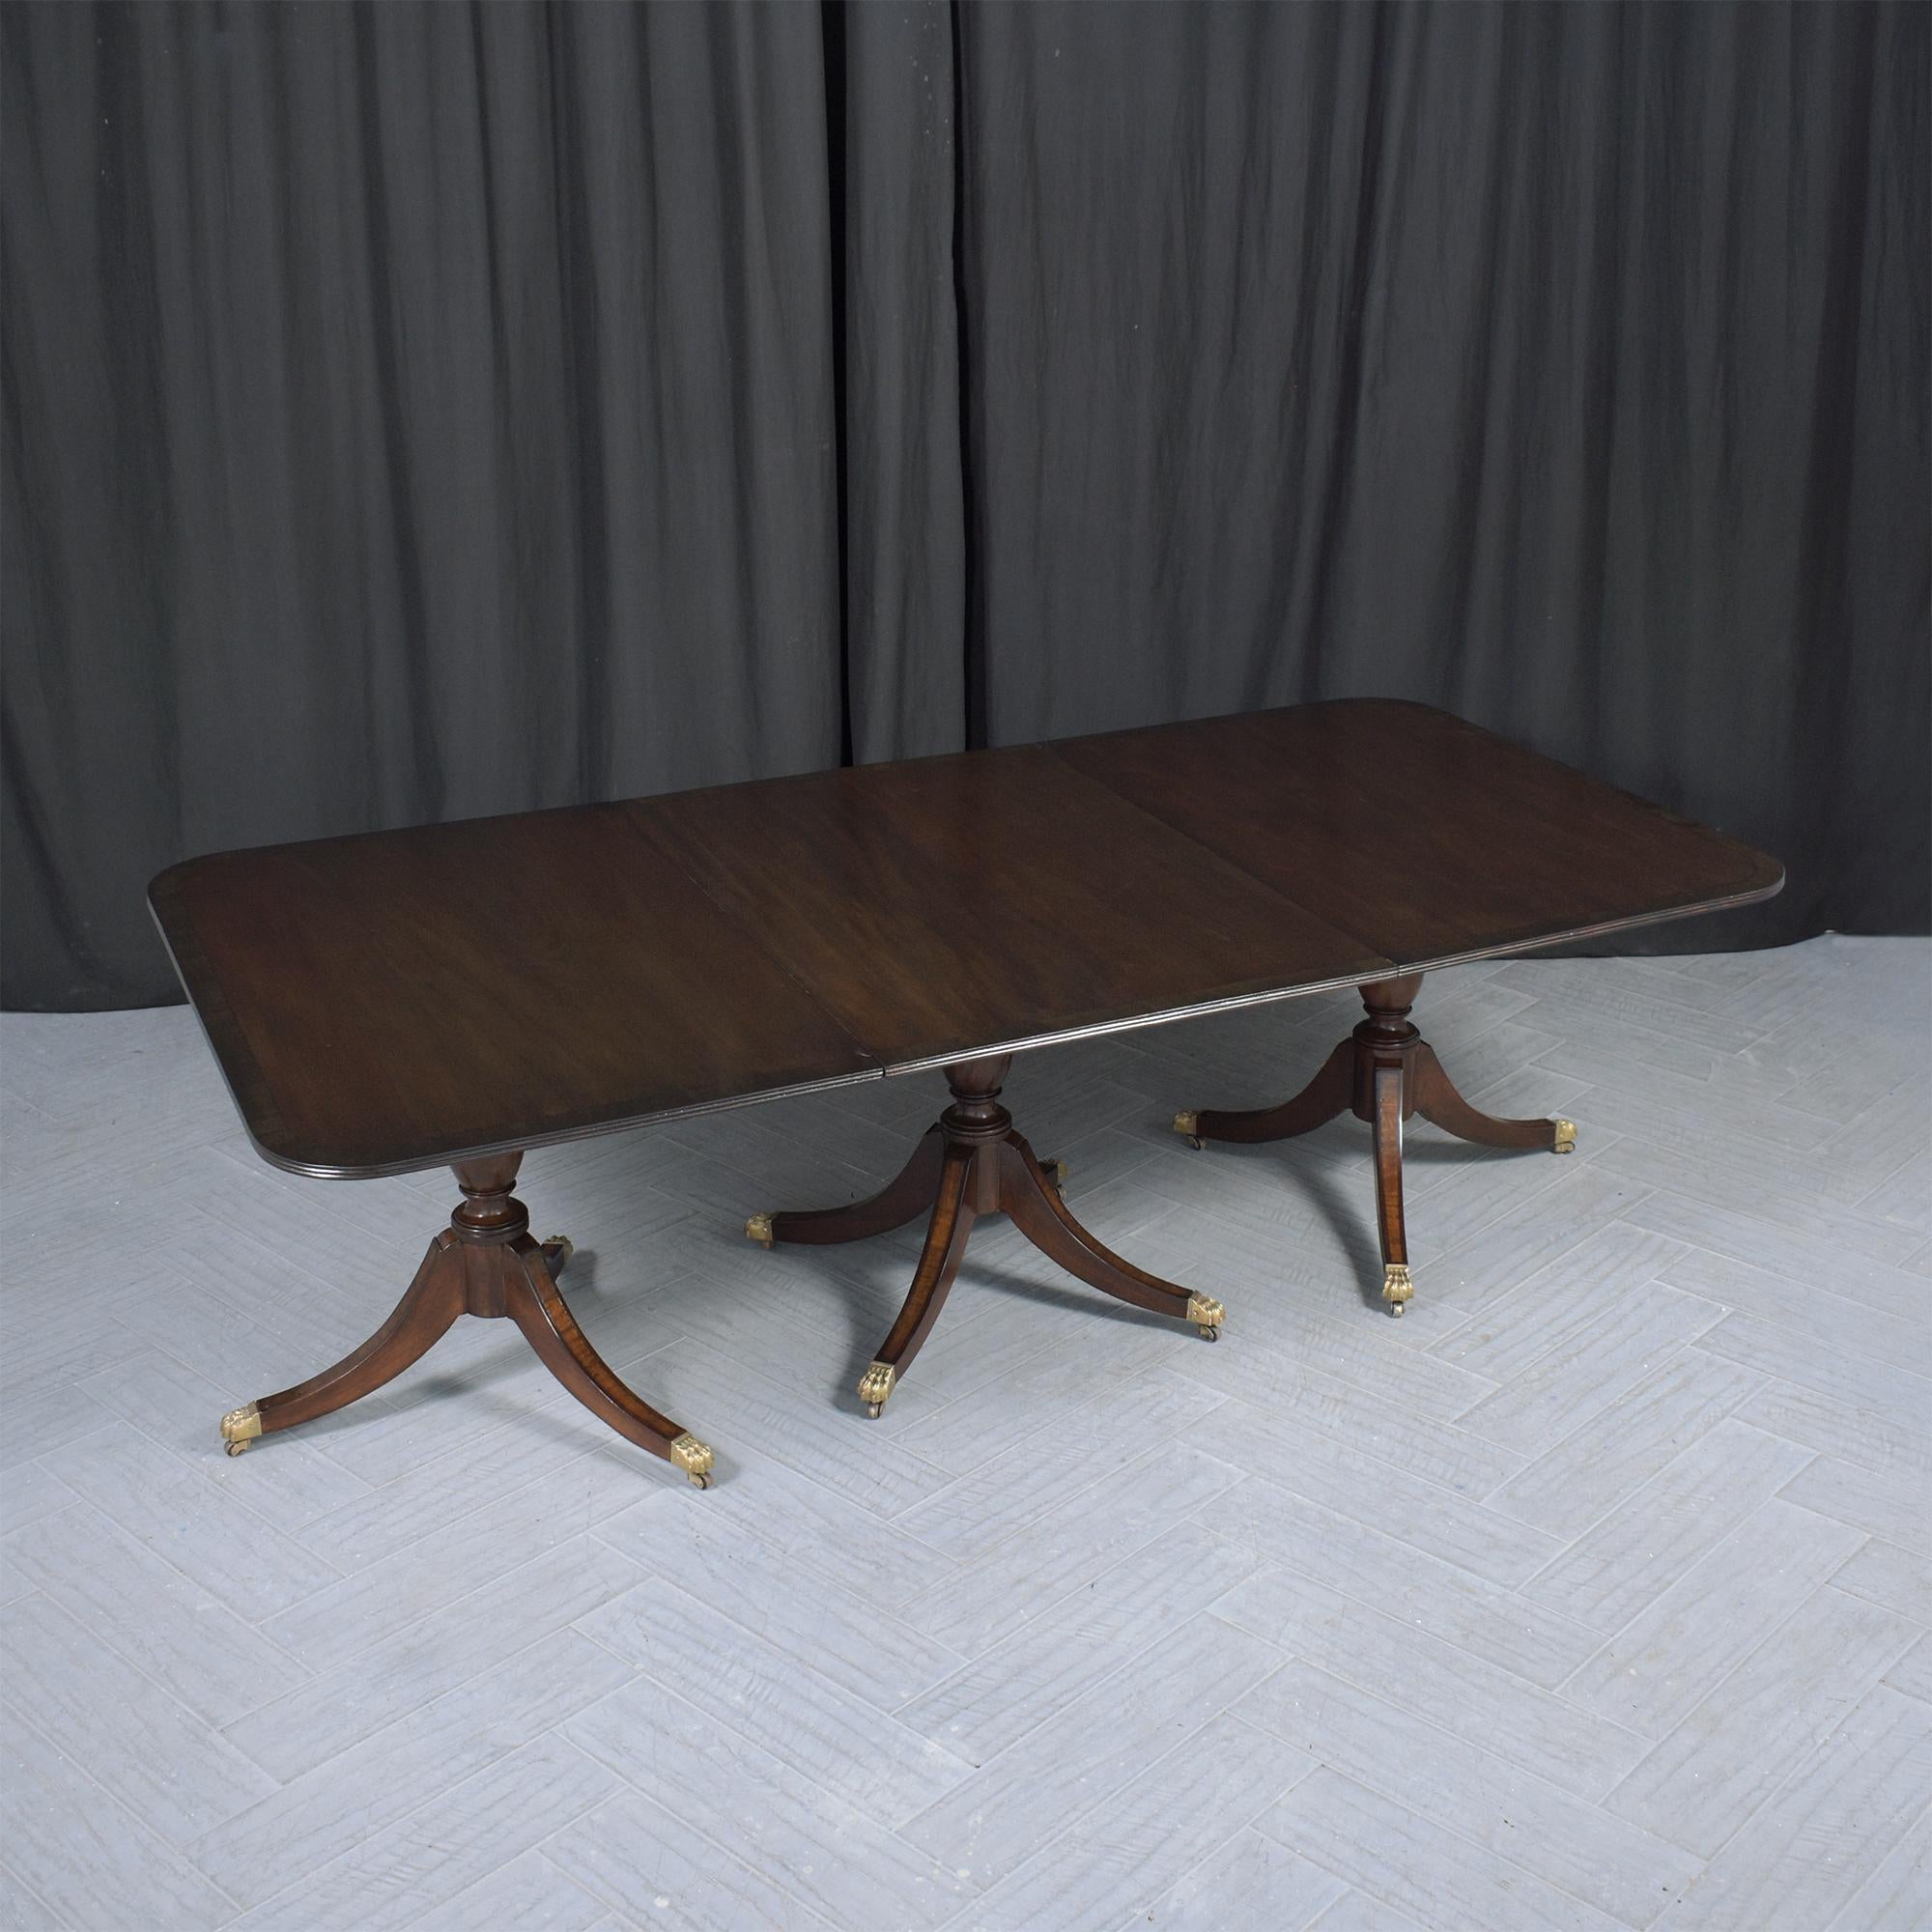 Restored 1890s George III Mahogany Dining Table with Extendable Leaves For Sale 6